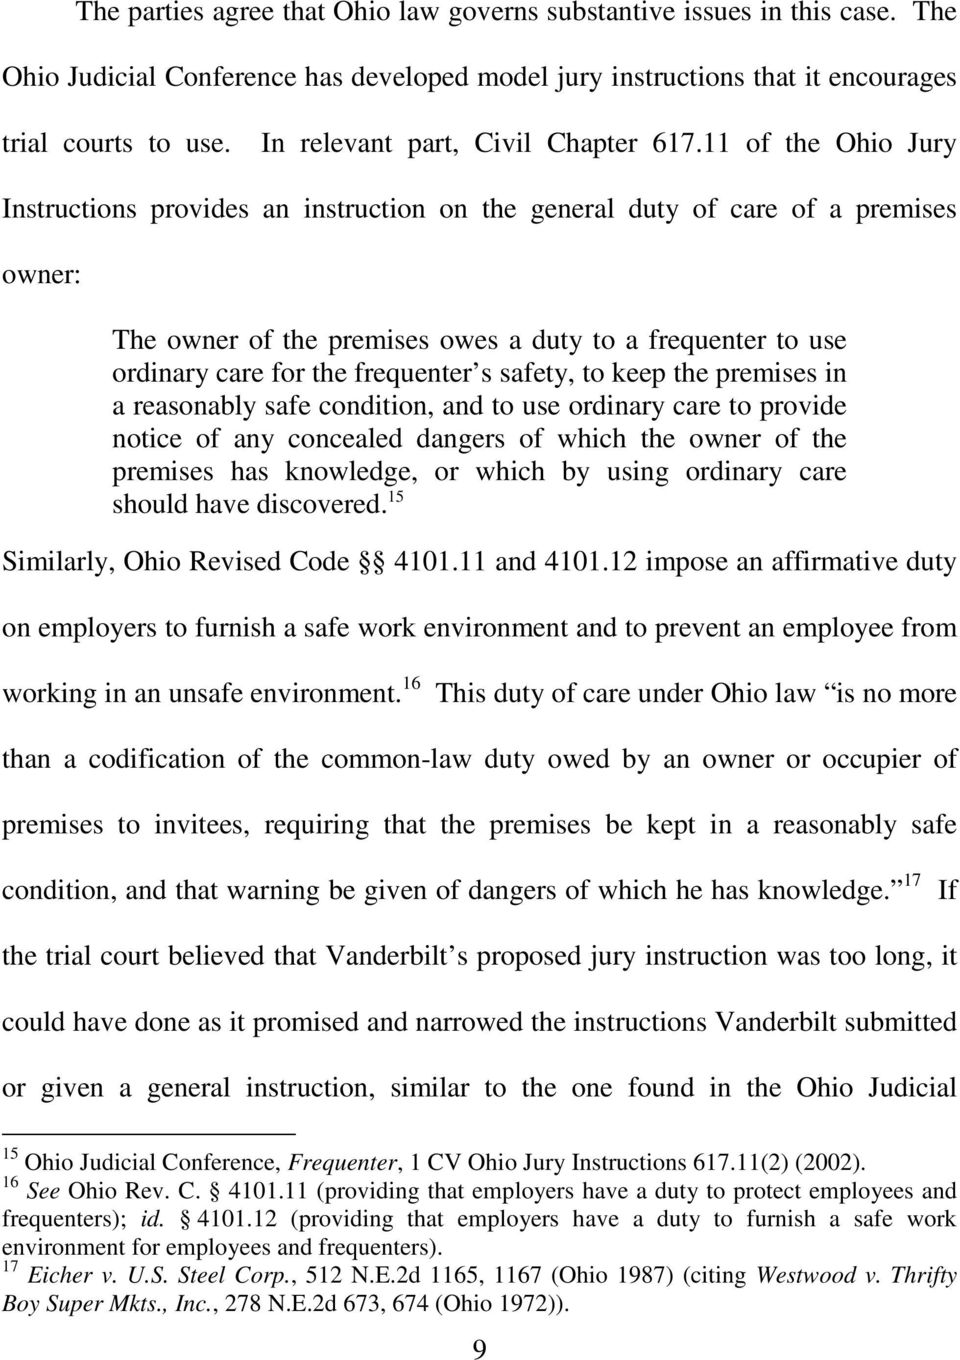 11 of the Ohio Jury Instructions provides an instruction on the general duty of care of a premises owner: The owner of the premises owes a duty to a frequenter to use ordinary care for the frequenter